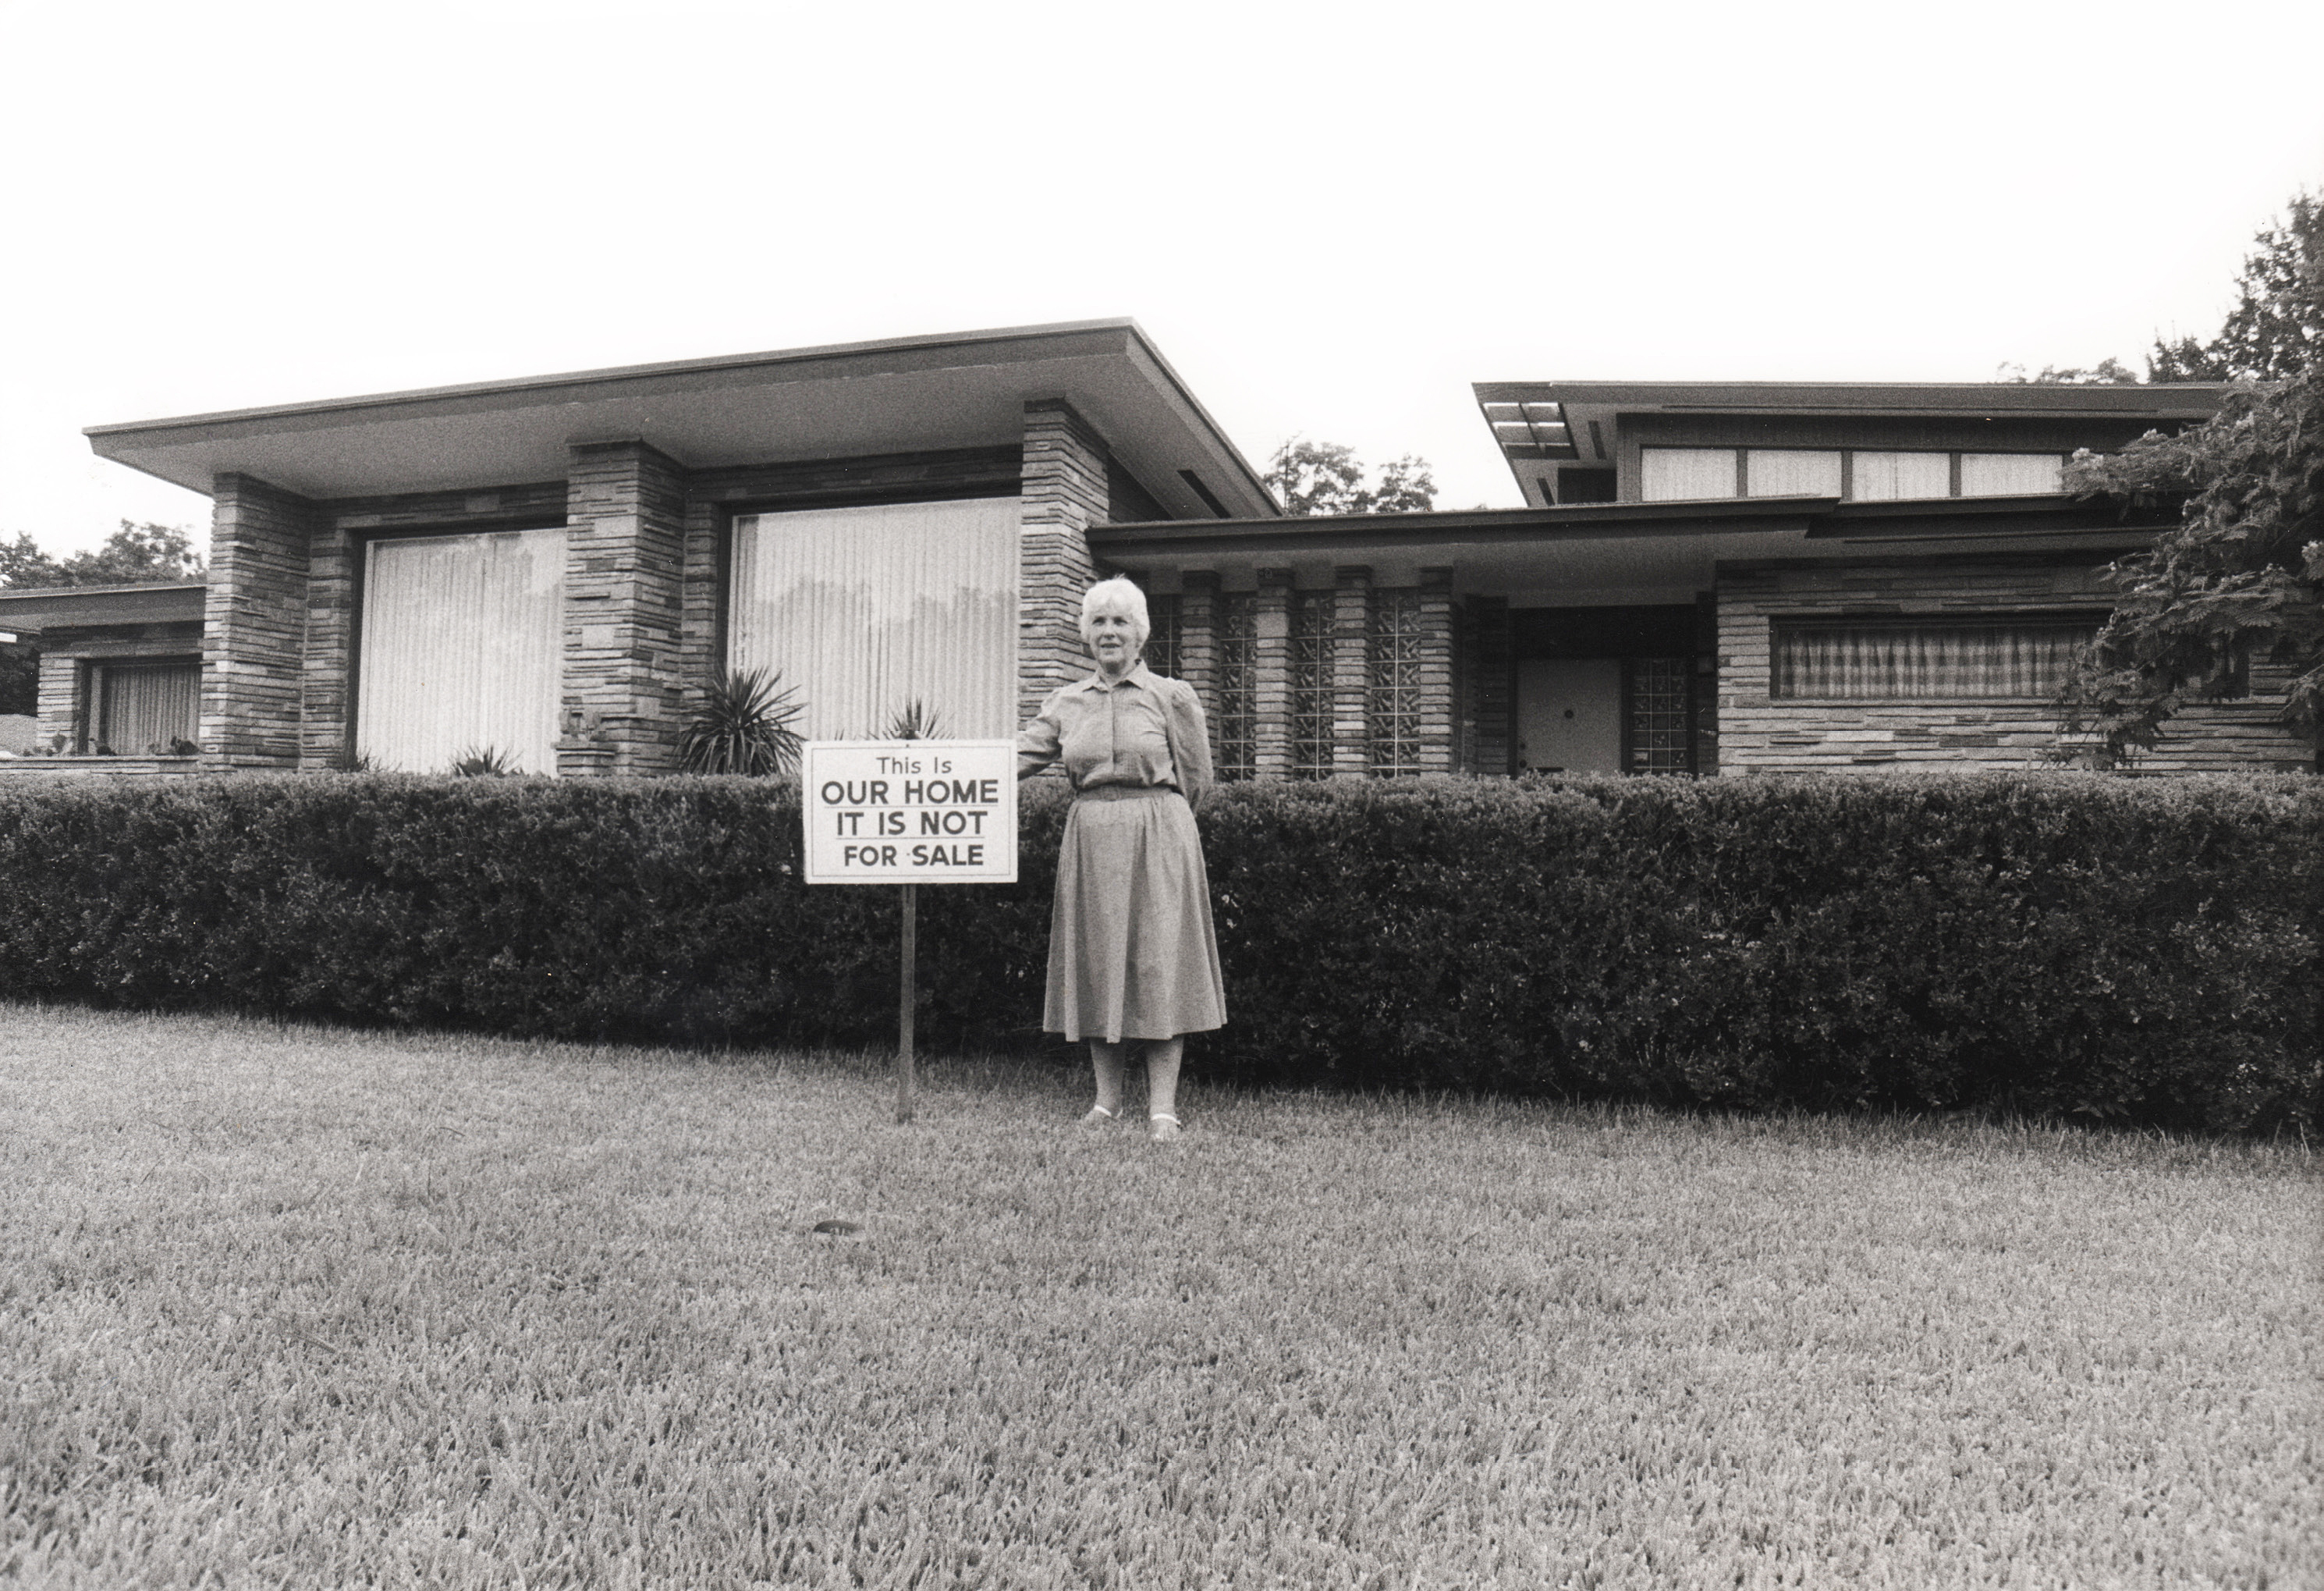 A white woman stands in front of a house next to a sign that reads: This Is OUR HOME IT IS NOT FOR SALE.